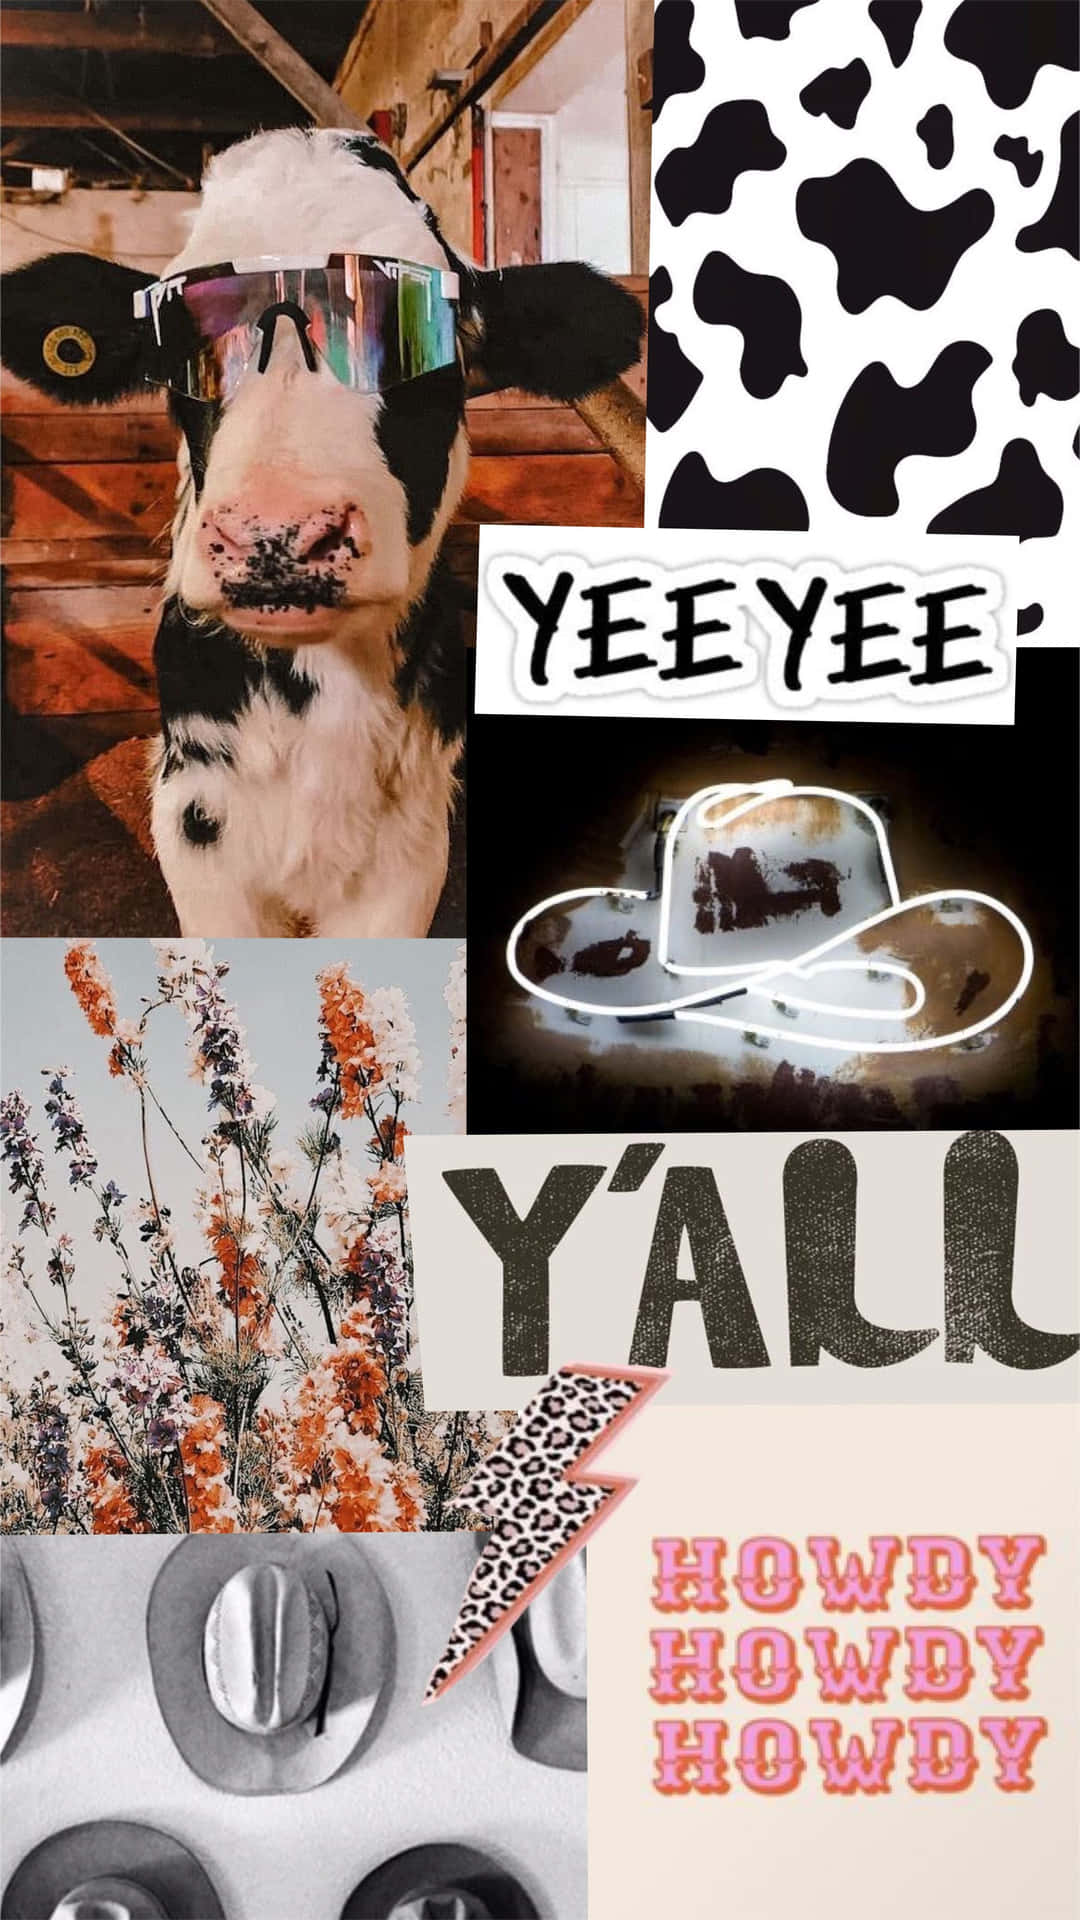 A Collage Of Cows, Cowboys, And Cows Background